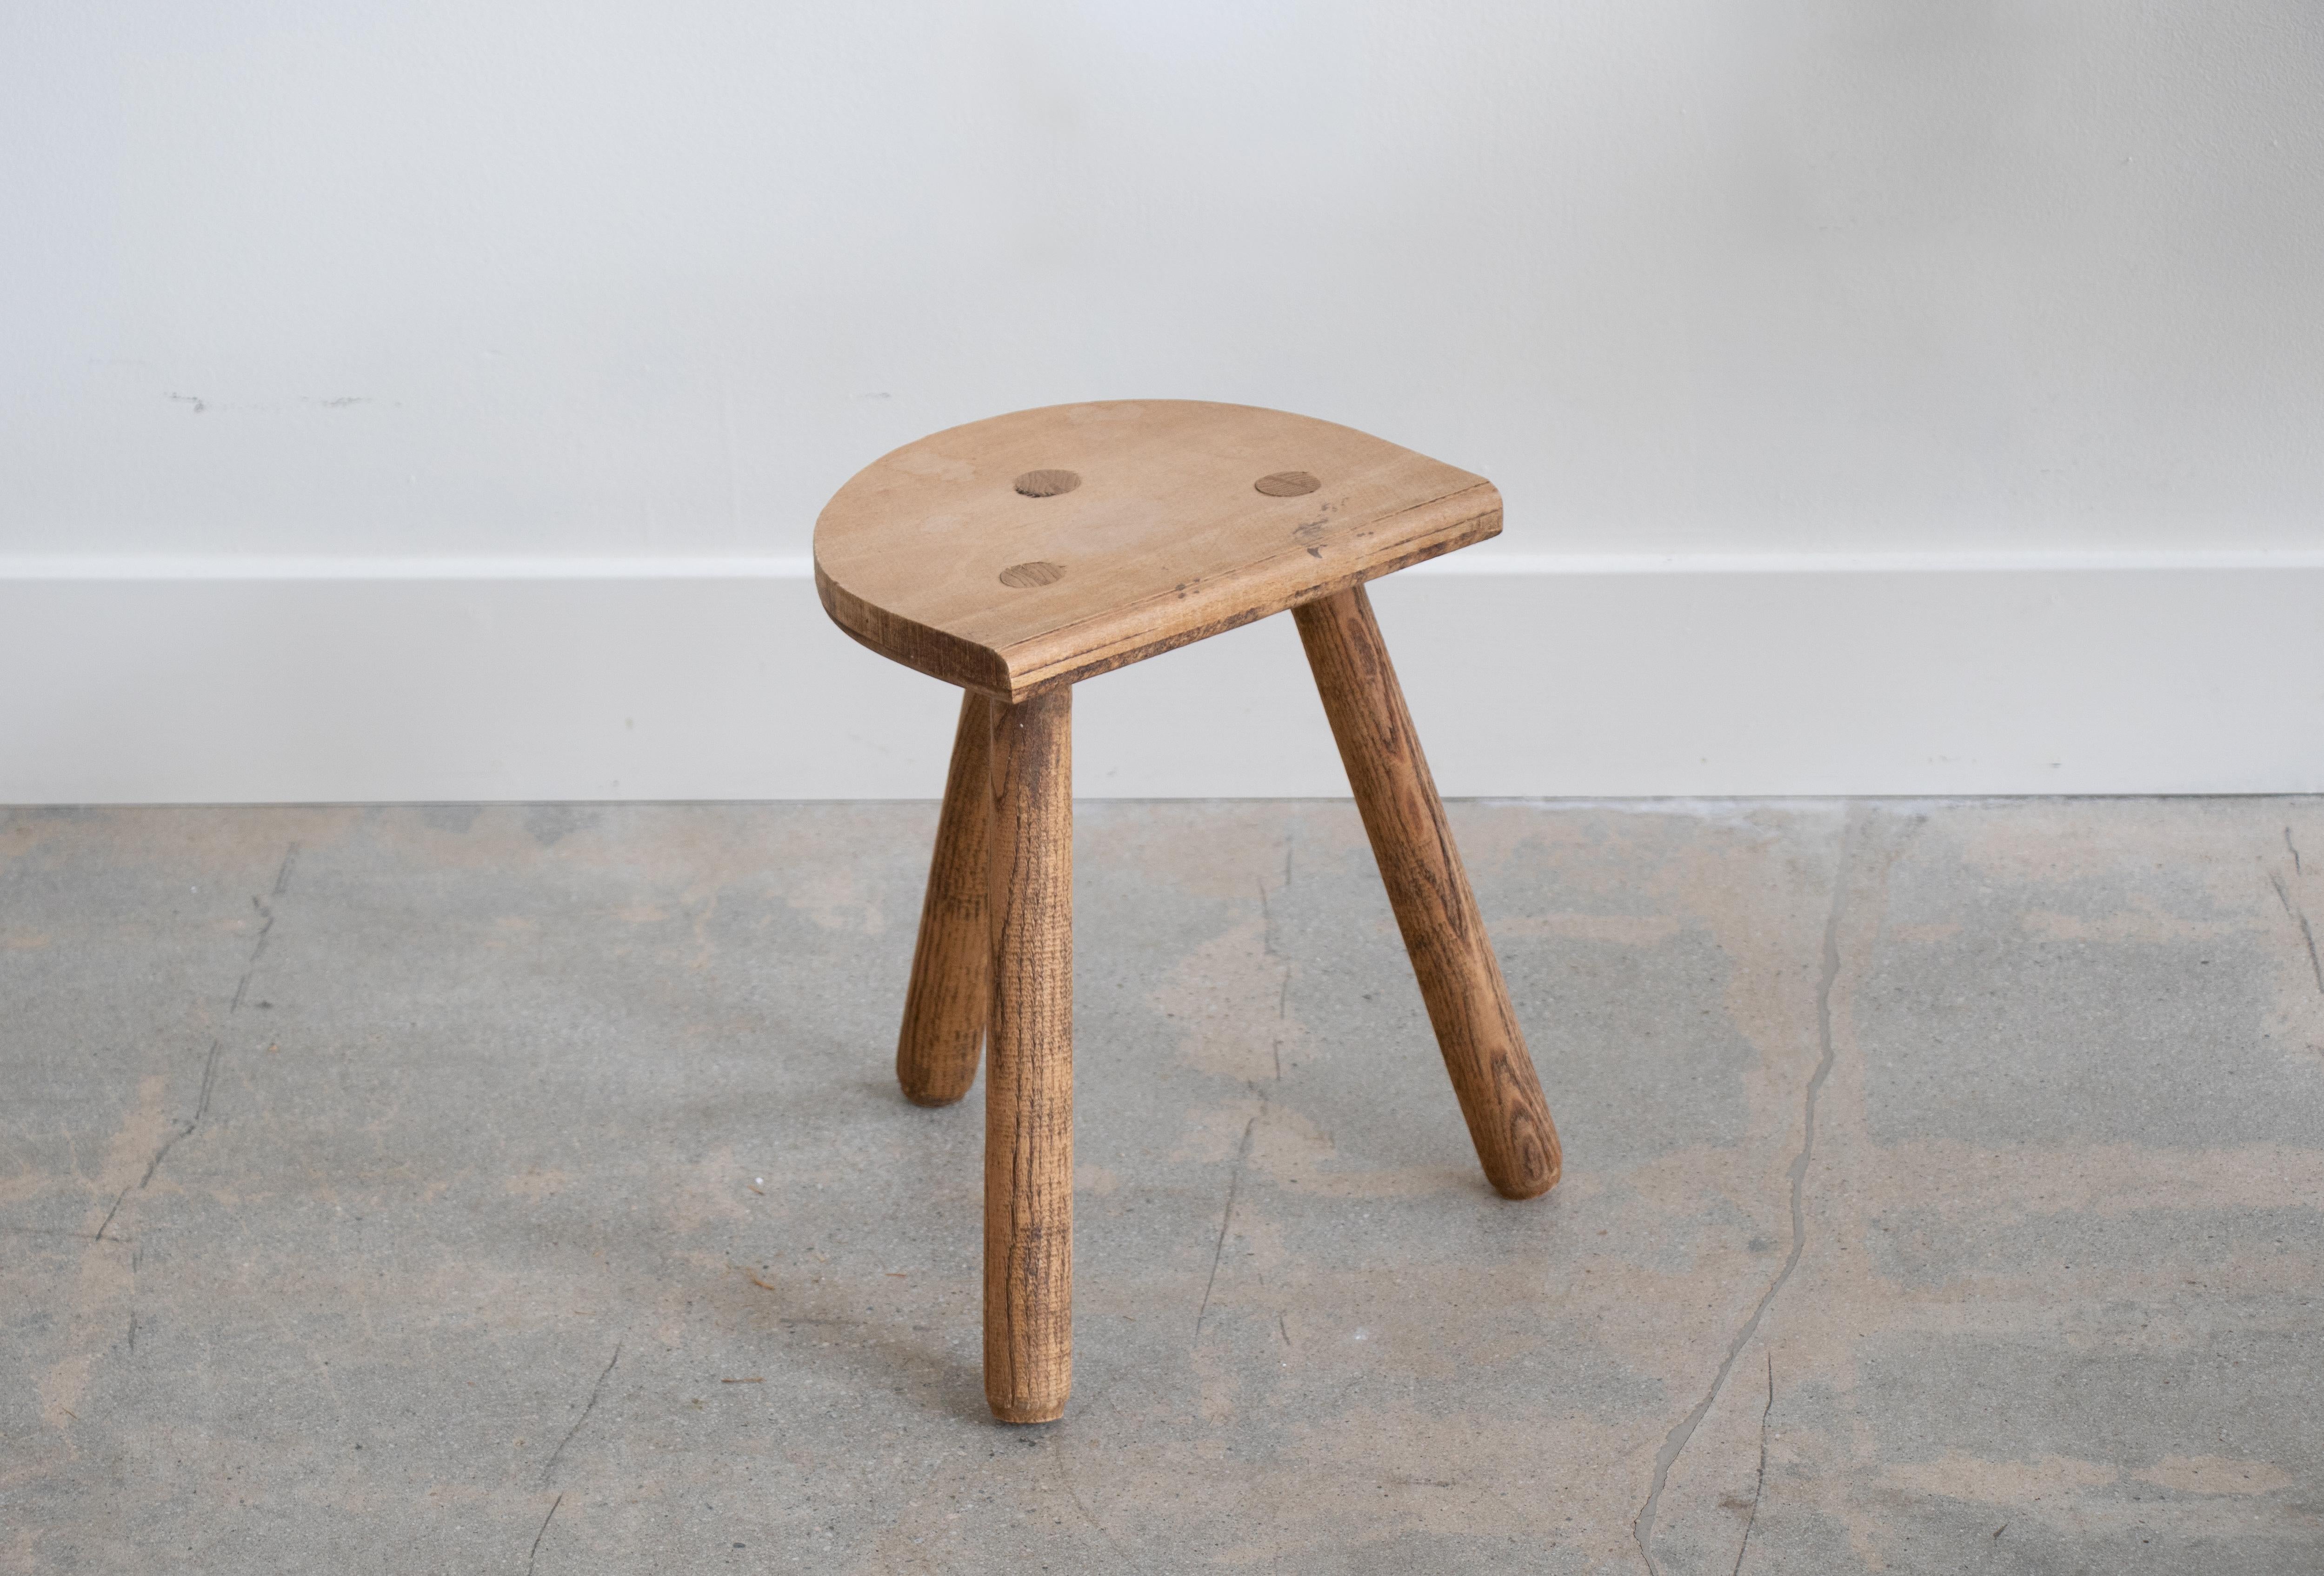 Vintage light oak stool with beautiful tripod legs from France. Original wood finish with great age markings and patina. Can be used as a small stool or as side table next to chairs. 

 